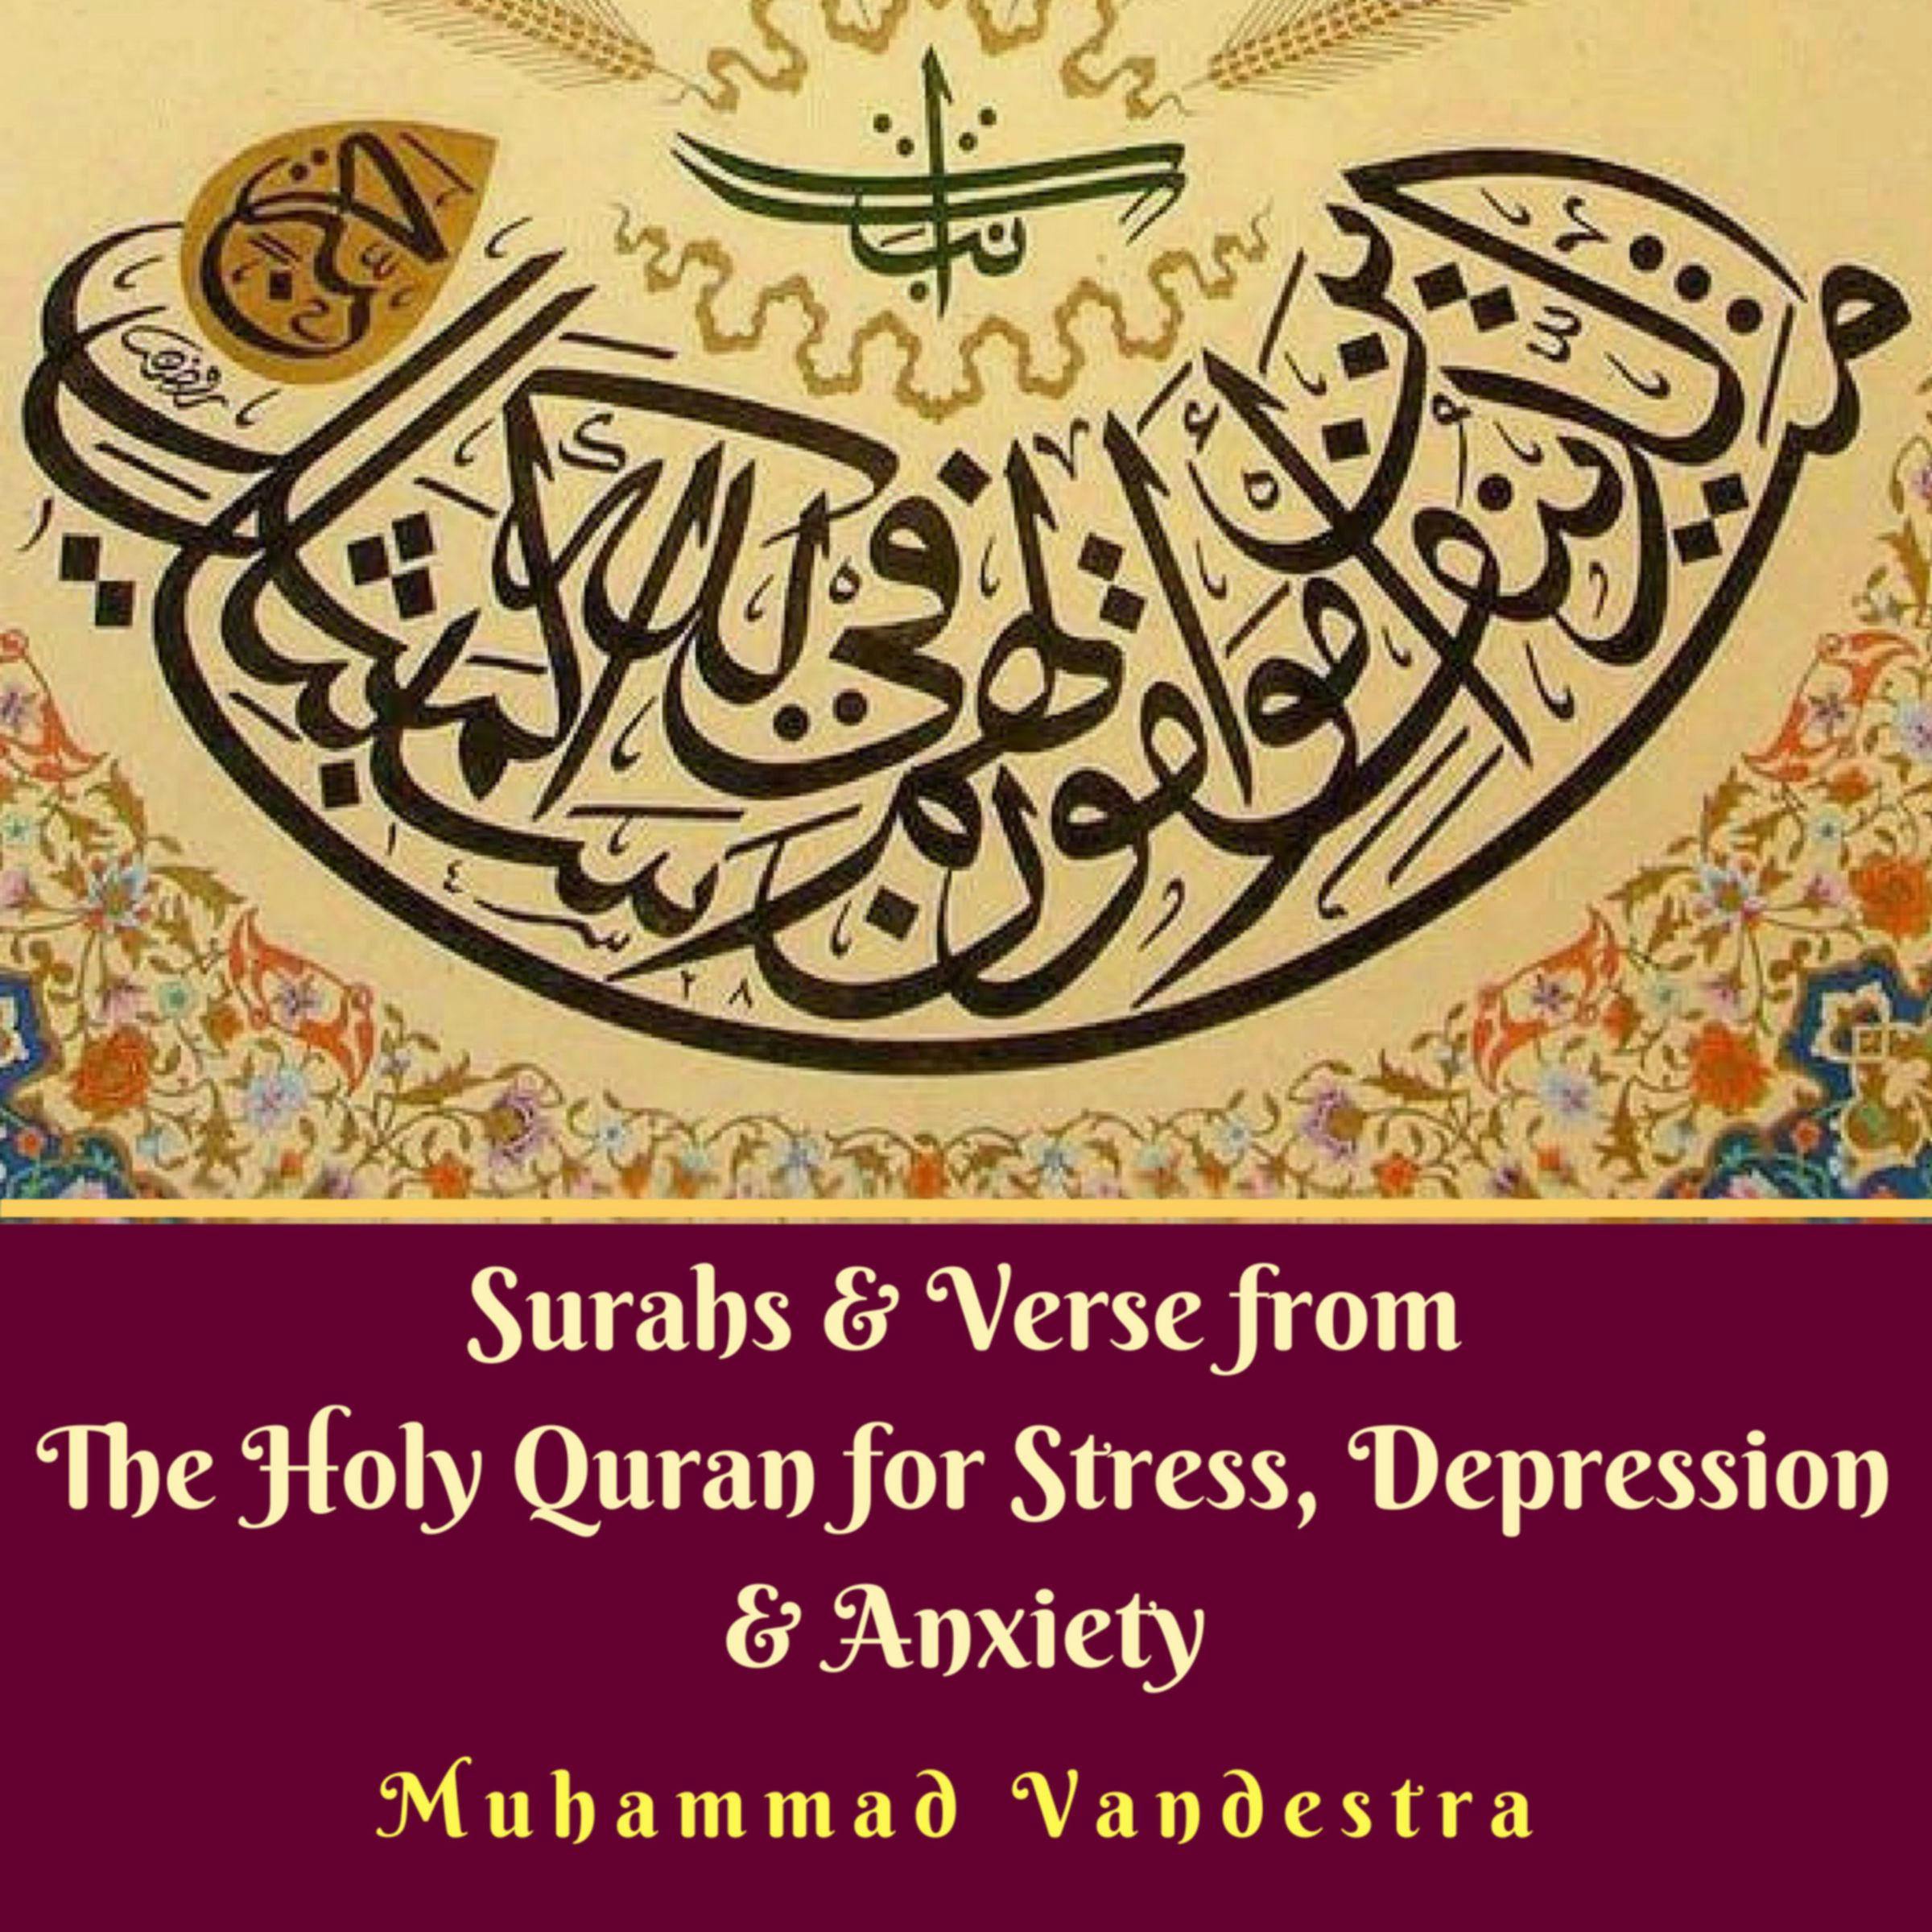 Surahs & Verse from The Holy Quran for Stress, Depression & Anxiety - Muhammad Vandestra